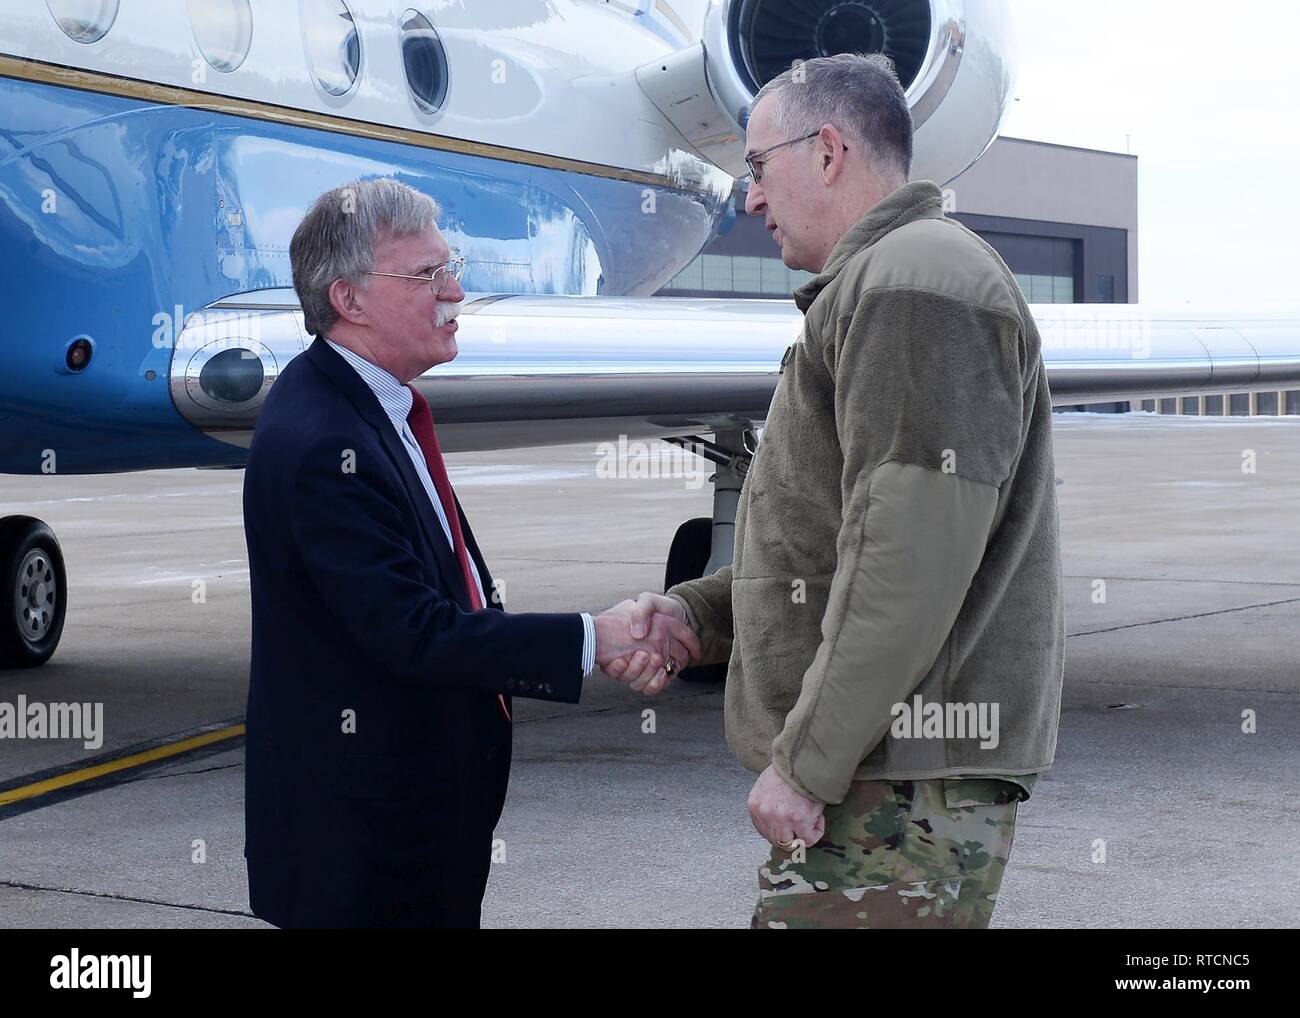 Air Force Gen. John Hyten, commander of United States Strategic Command (USSTRATCOM), greets Ambassador John Bolton, National Security Advisor, during his trip to USSTRATCOM, Offutt Air Force Base, Neb., Feb. 14, 2019. The Ambassador observed USSTRATCOM’s combat-ready force, engaged in discussions with senior leaders and thanked warfighters for their service to the nation. Bolton’s visit also highlighted USSTRATCOM’s critical role in the National Security Strategy. Stock Photo